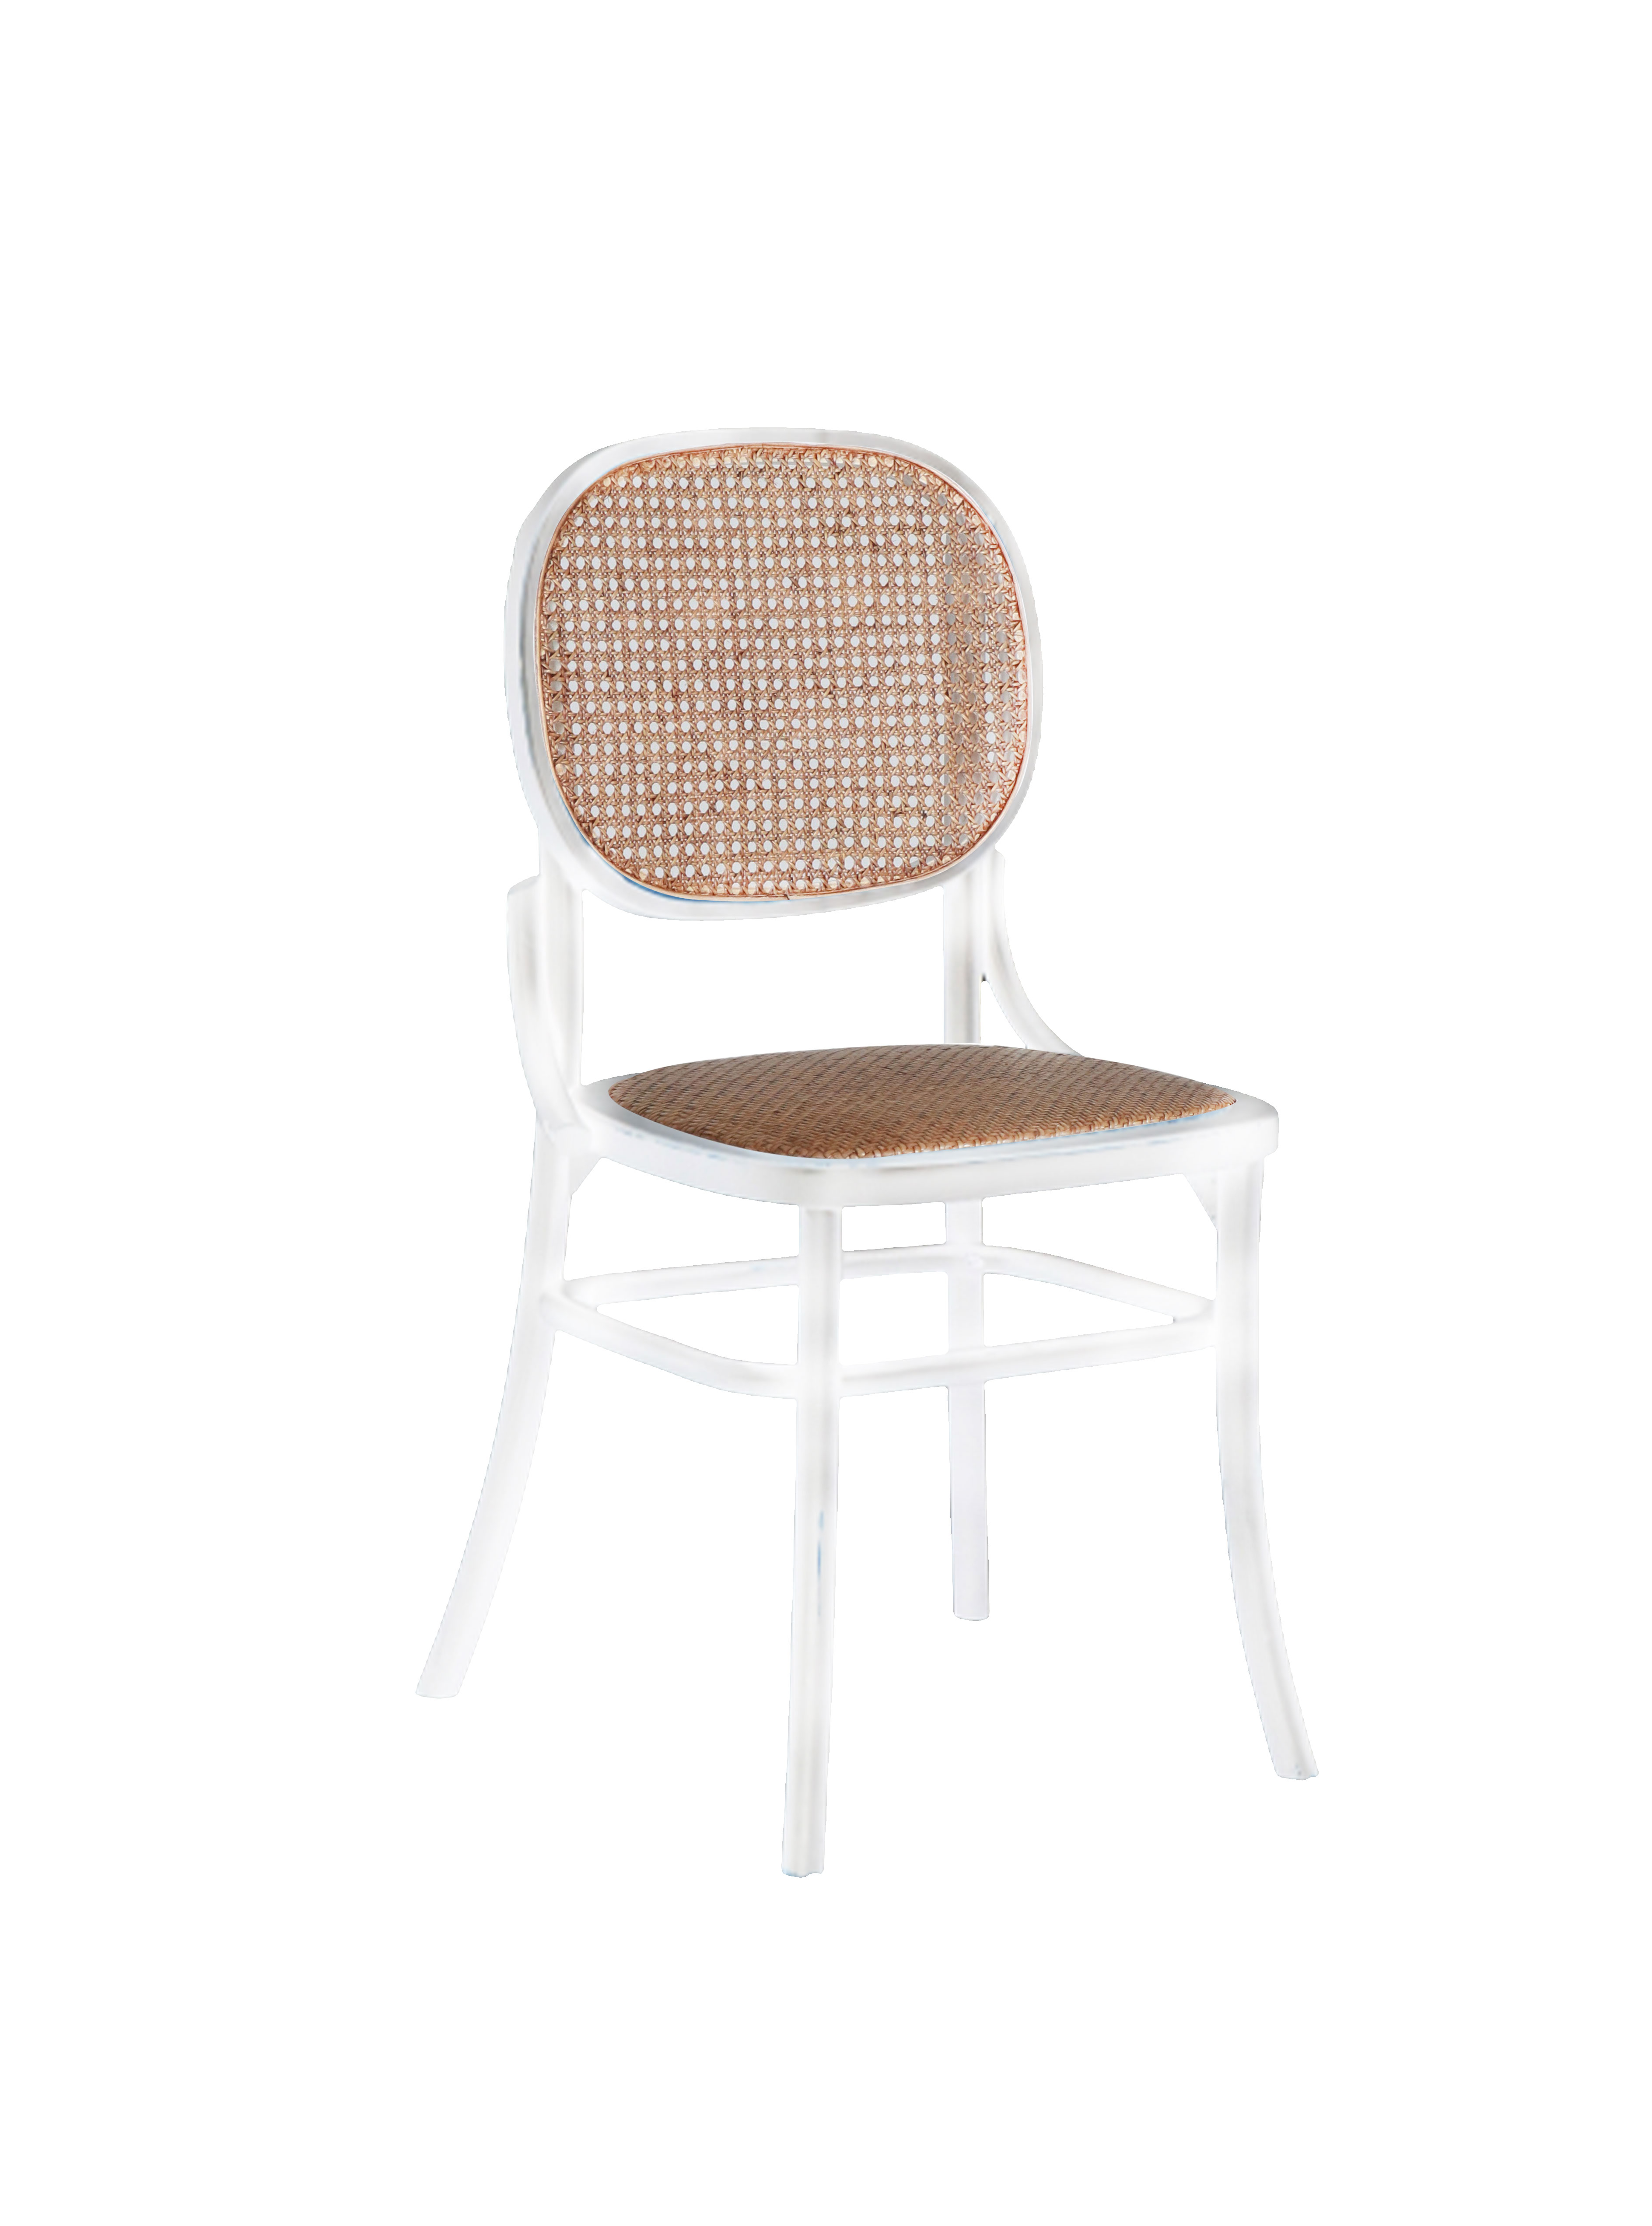 white wooden chair with rattan back and seat